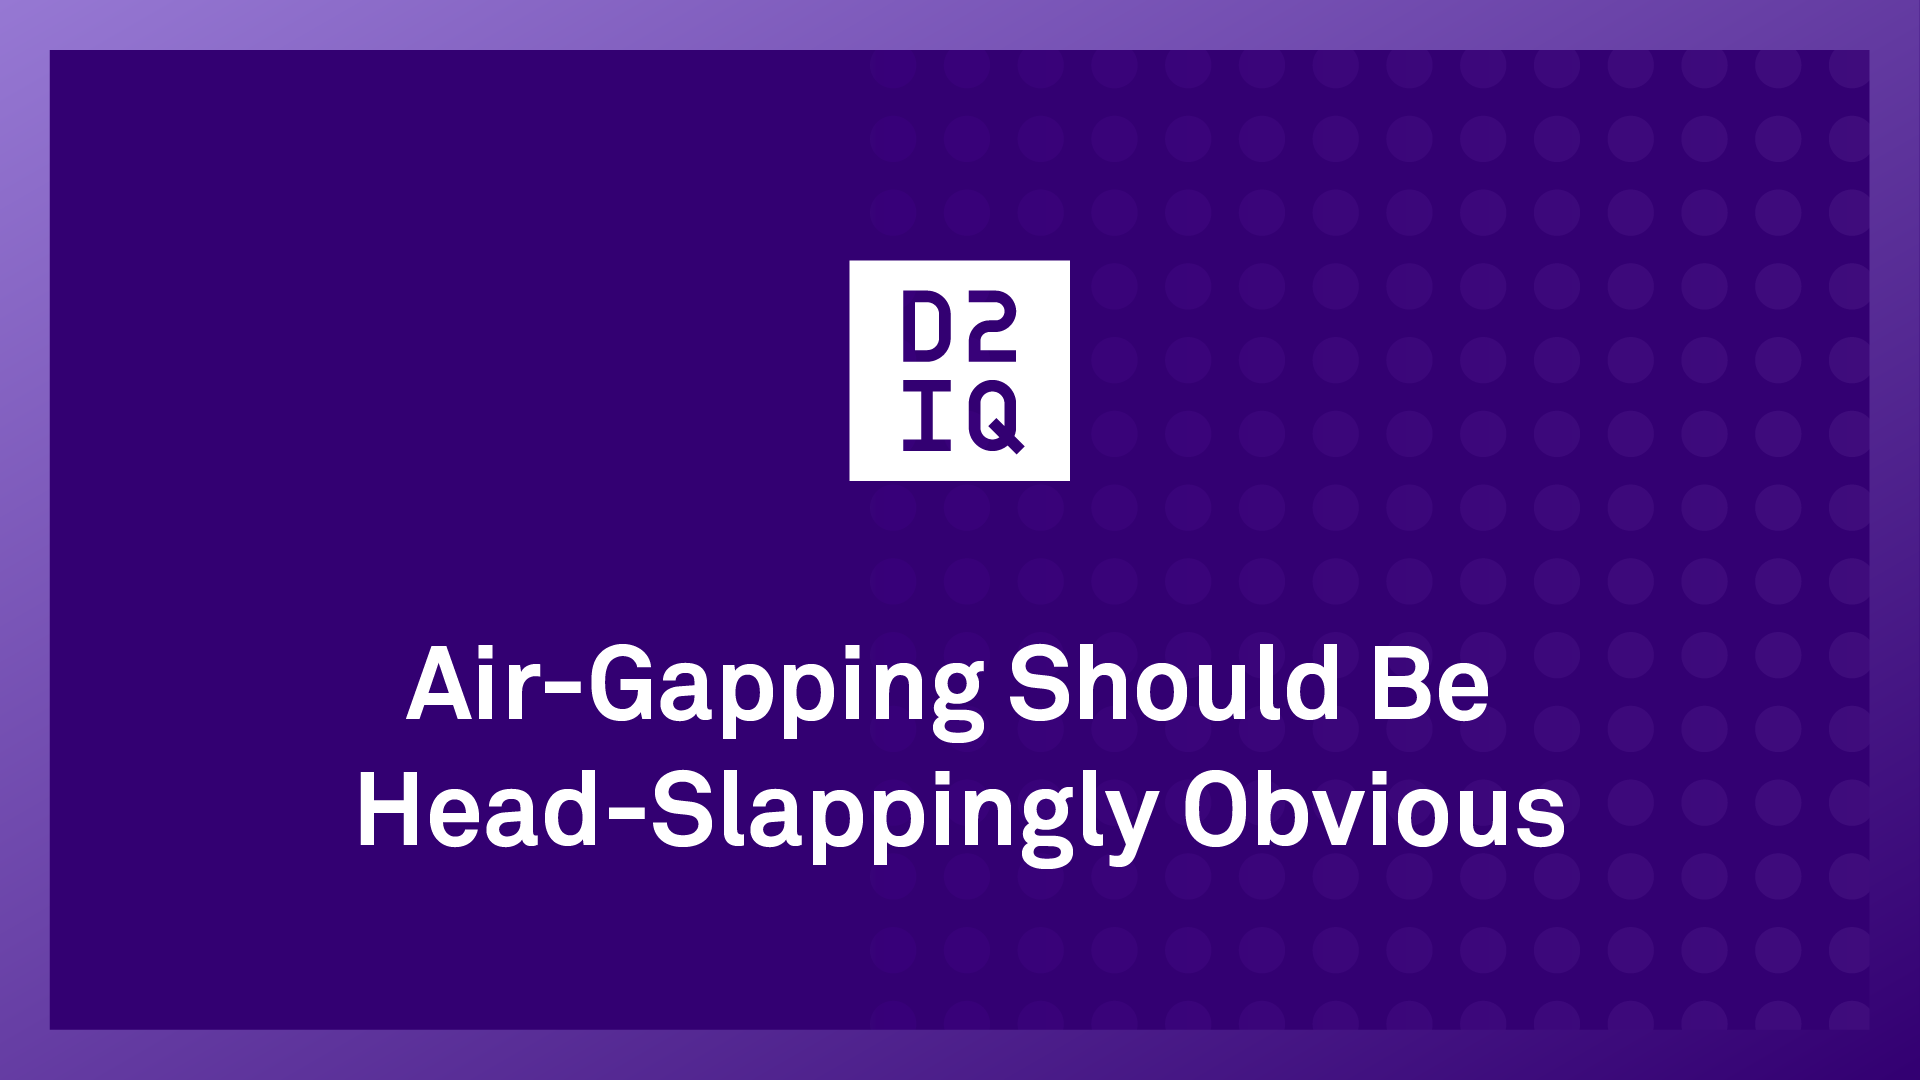 Air-Gapping Should Be Head-Slappingly Obvious